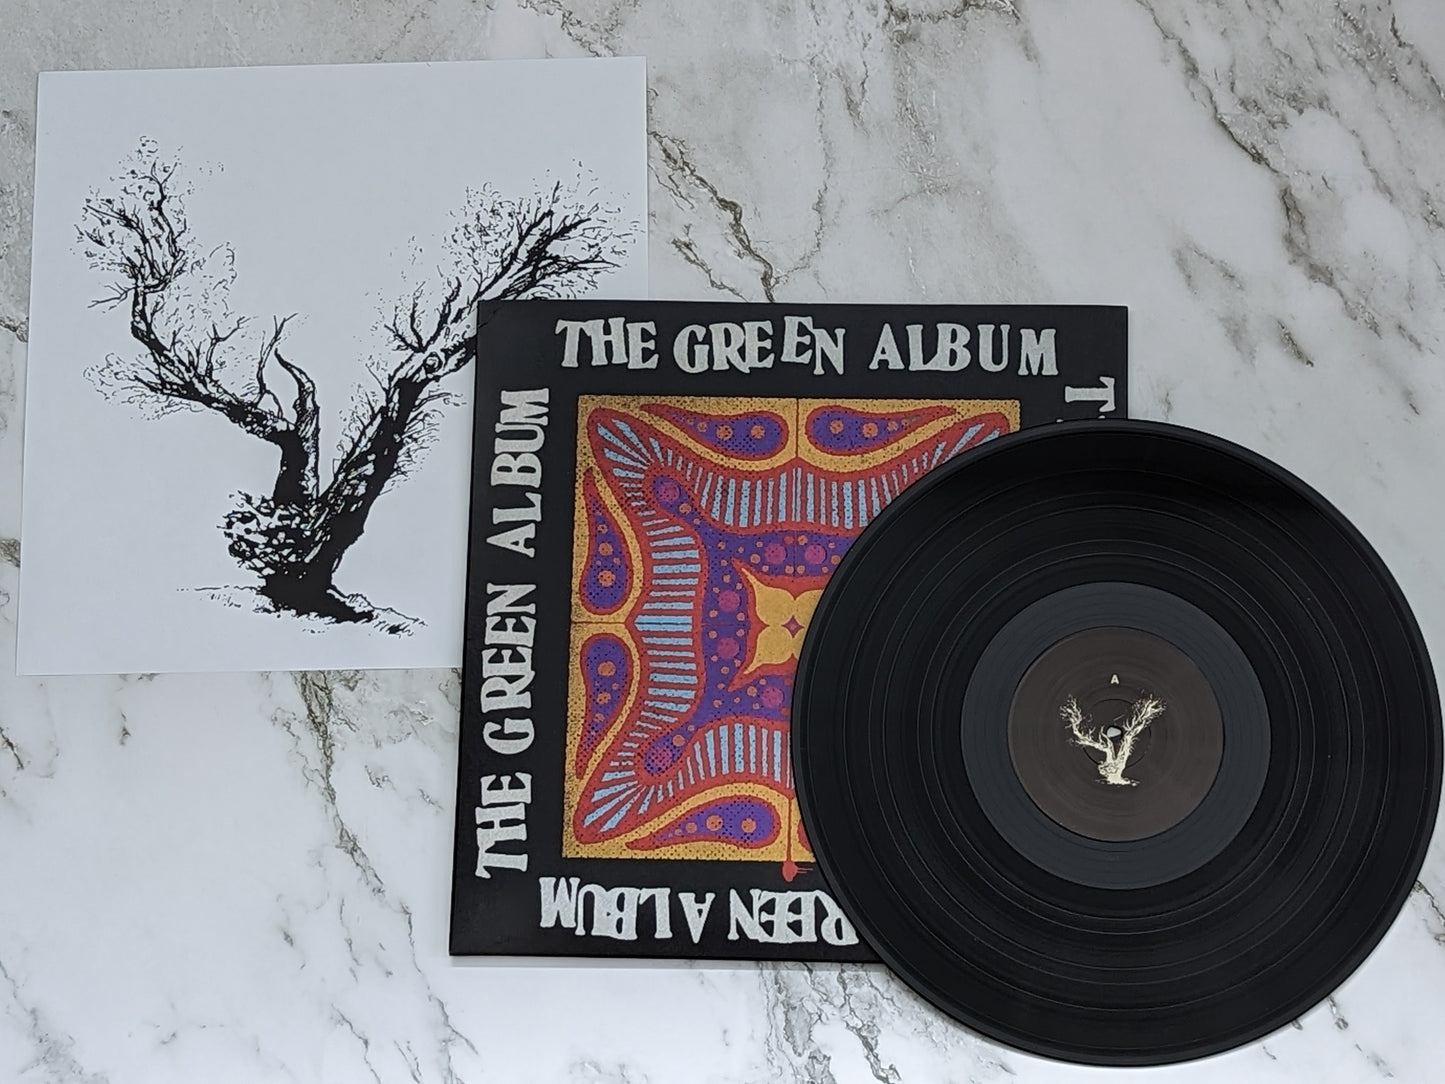 The Green Album [LP] by Yellow Shoots